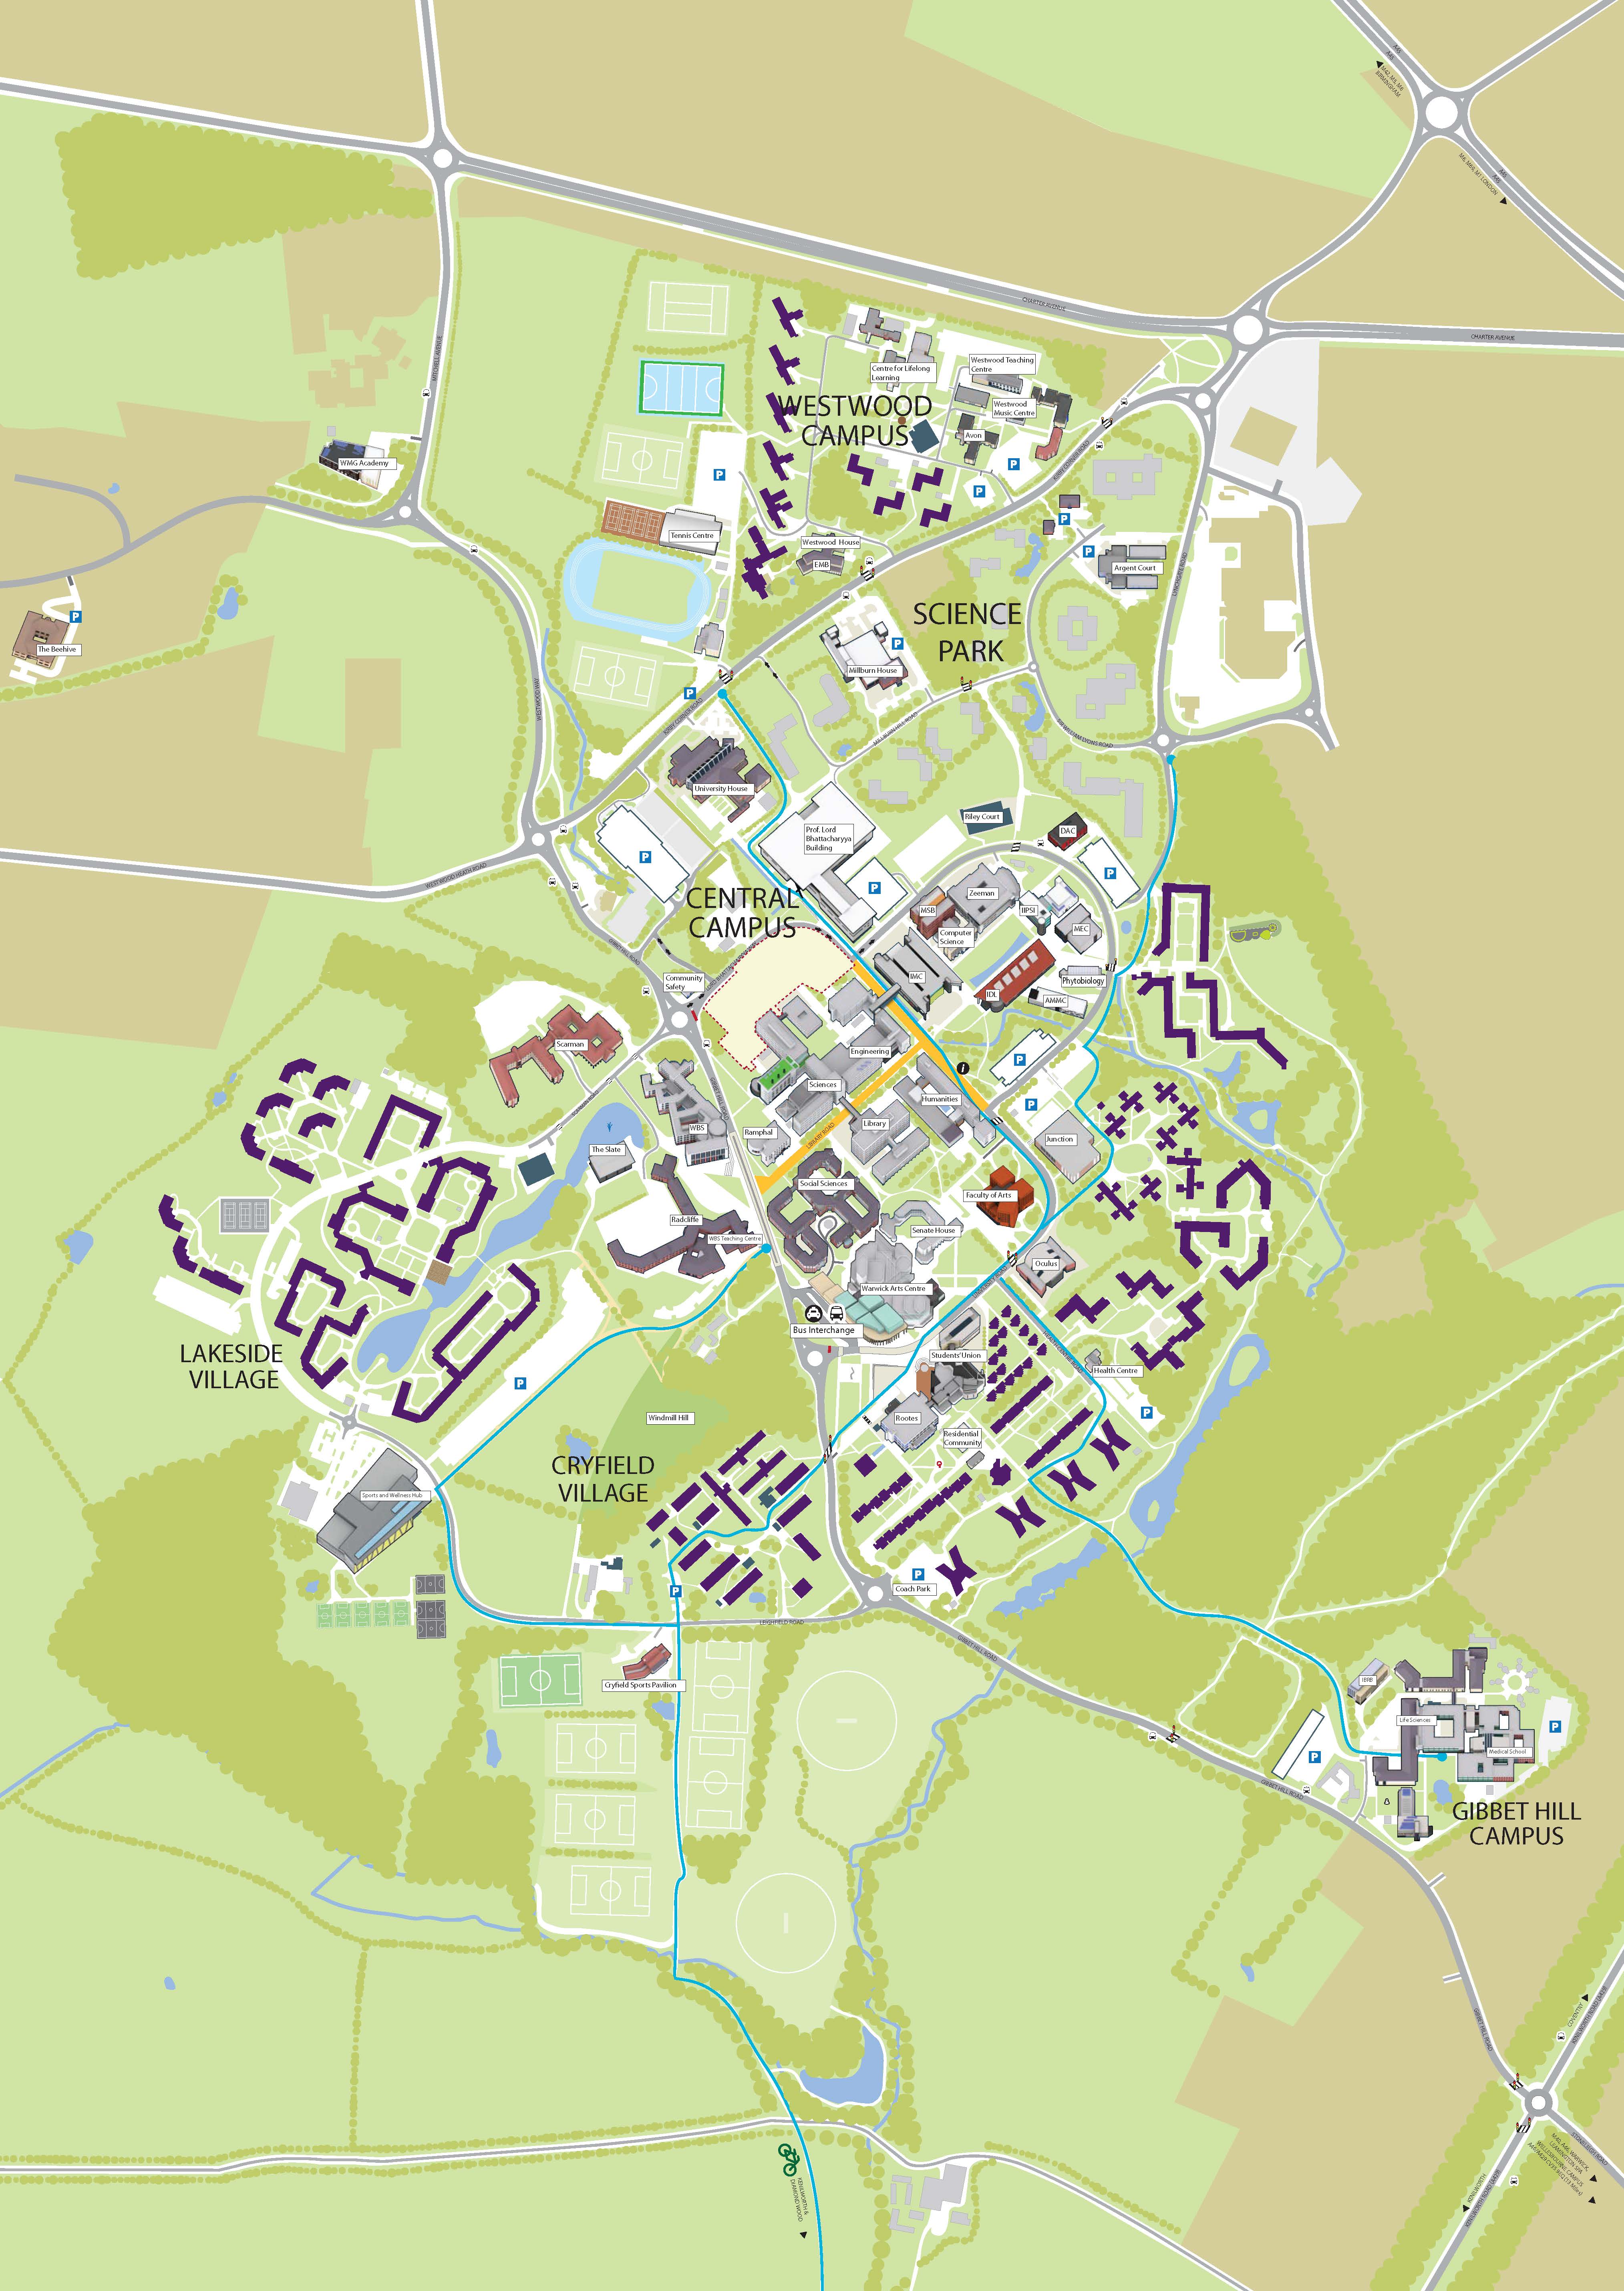 The University of Warwick campus map